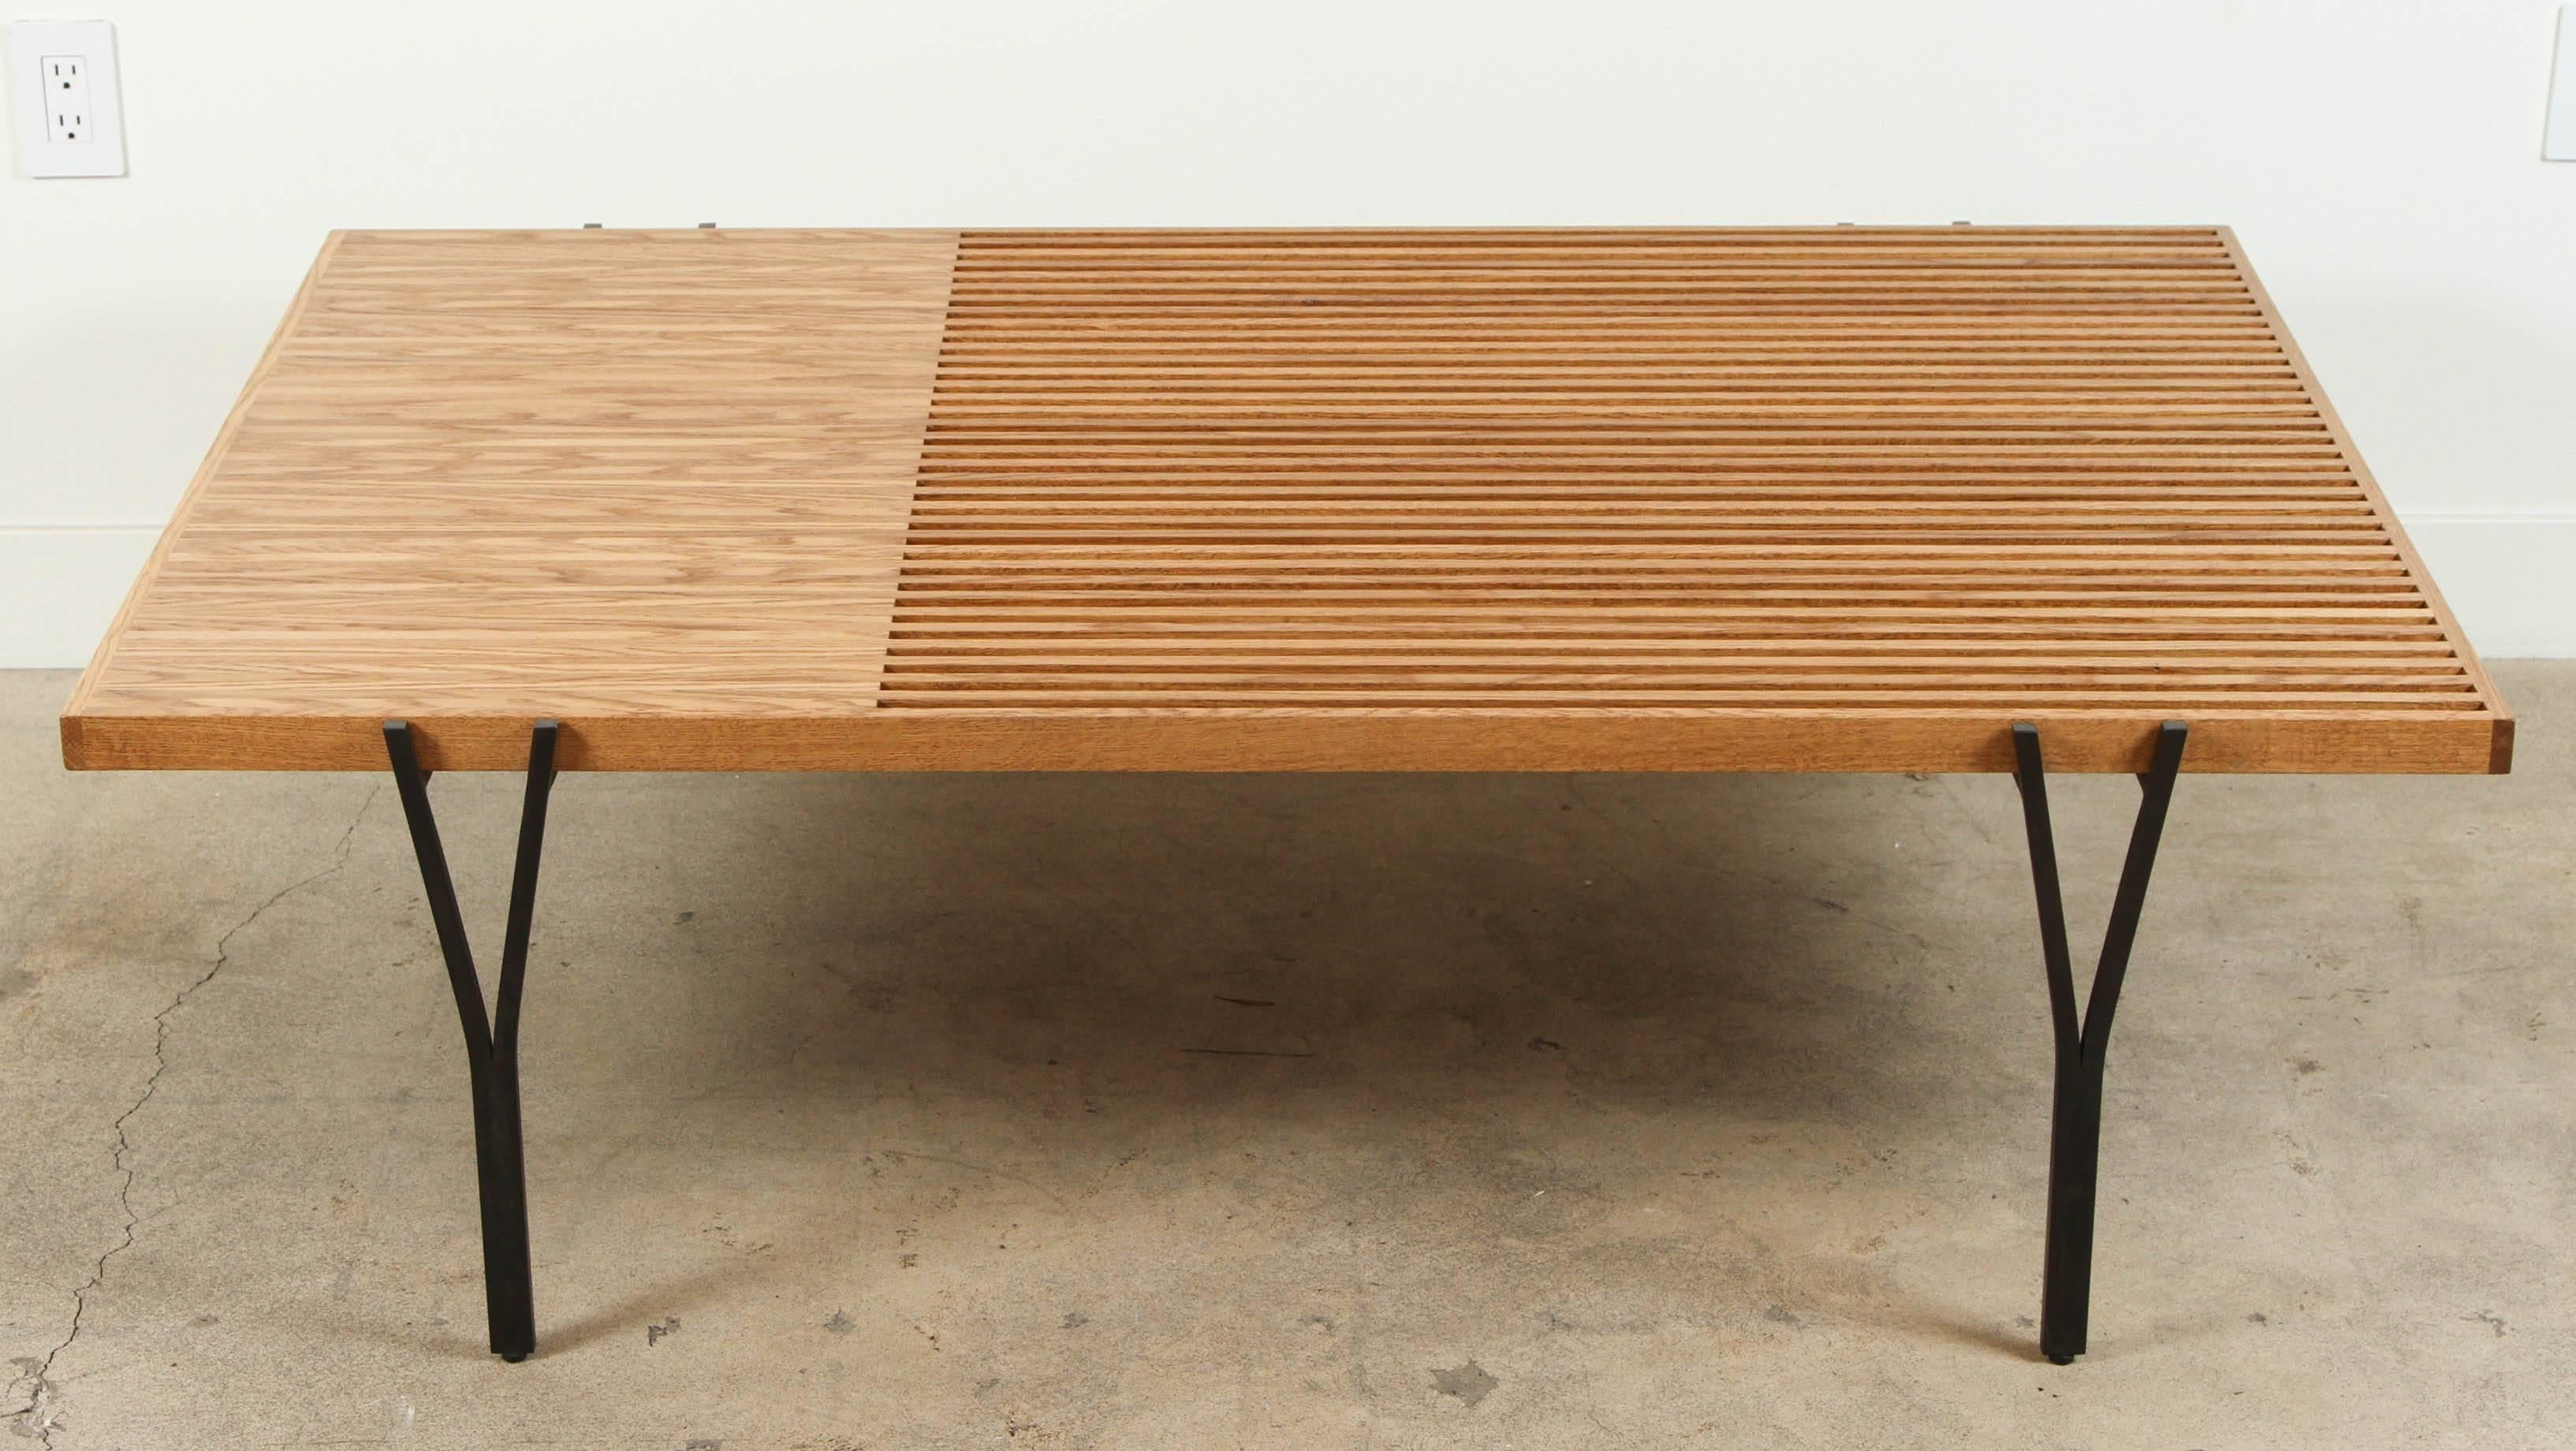 The Y-Leg Coffee Table top is composed of solid American walnut or white oak strips. Both ends of the table have visible dowel joinery which adds to the handcrafted feel and the strength of the table. The base is plated steel with levelers on the